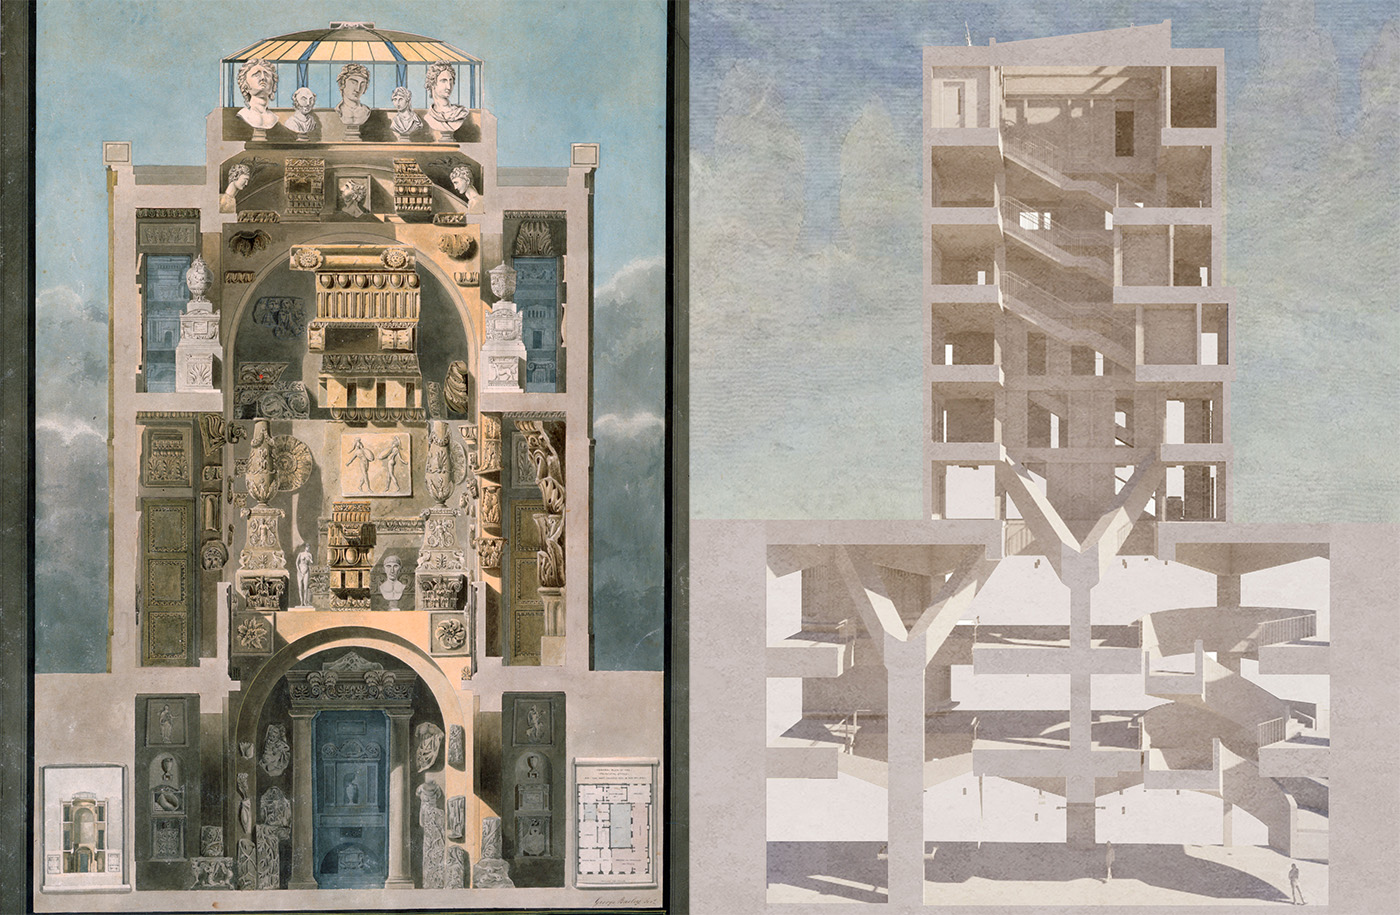 A section through Sir John Soane's Museum, alongside a section through the Marshall Building, showing the ways in which natural light is carried throughout the different levels of both buildings.